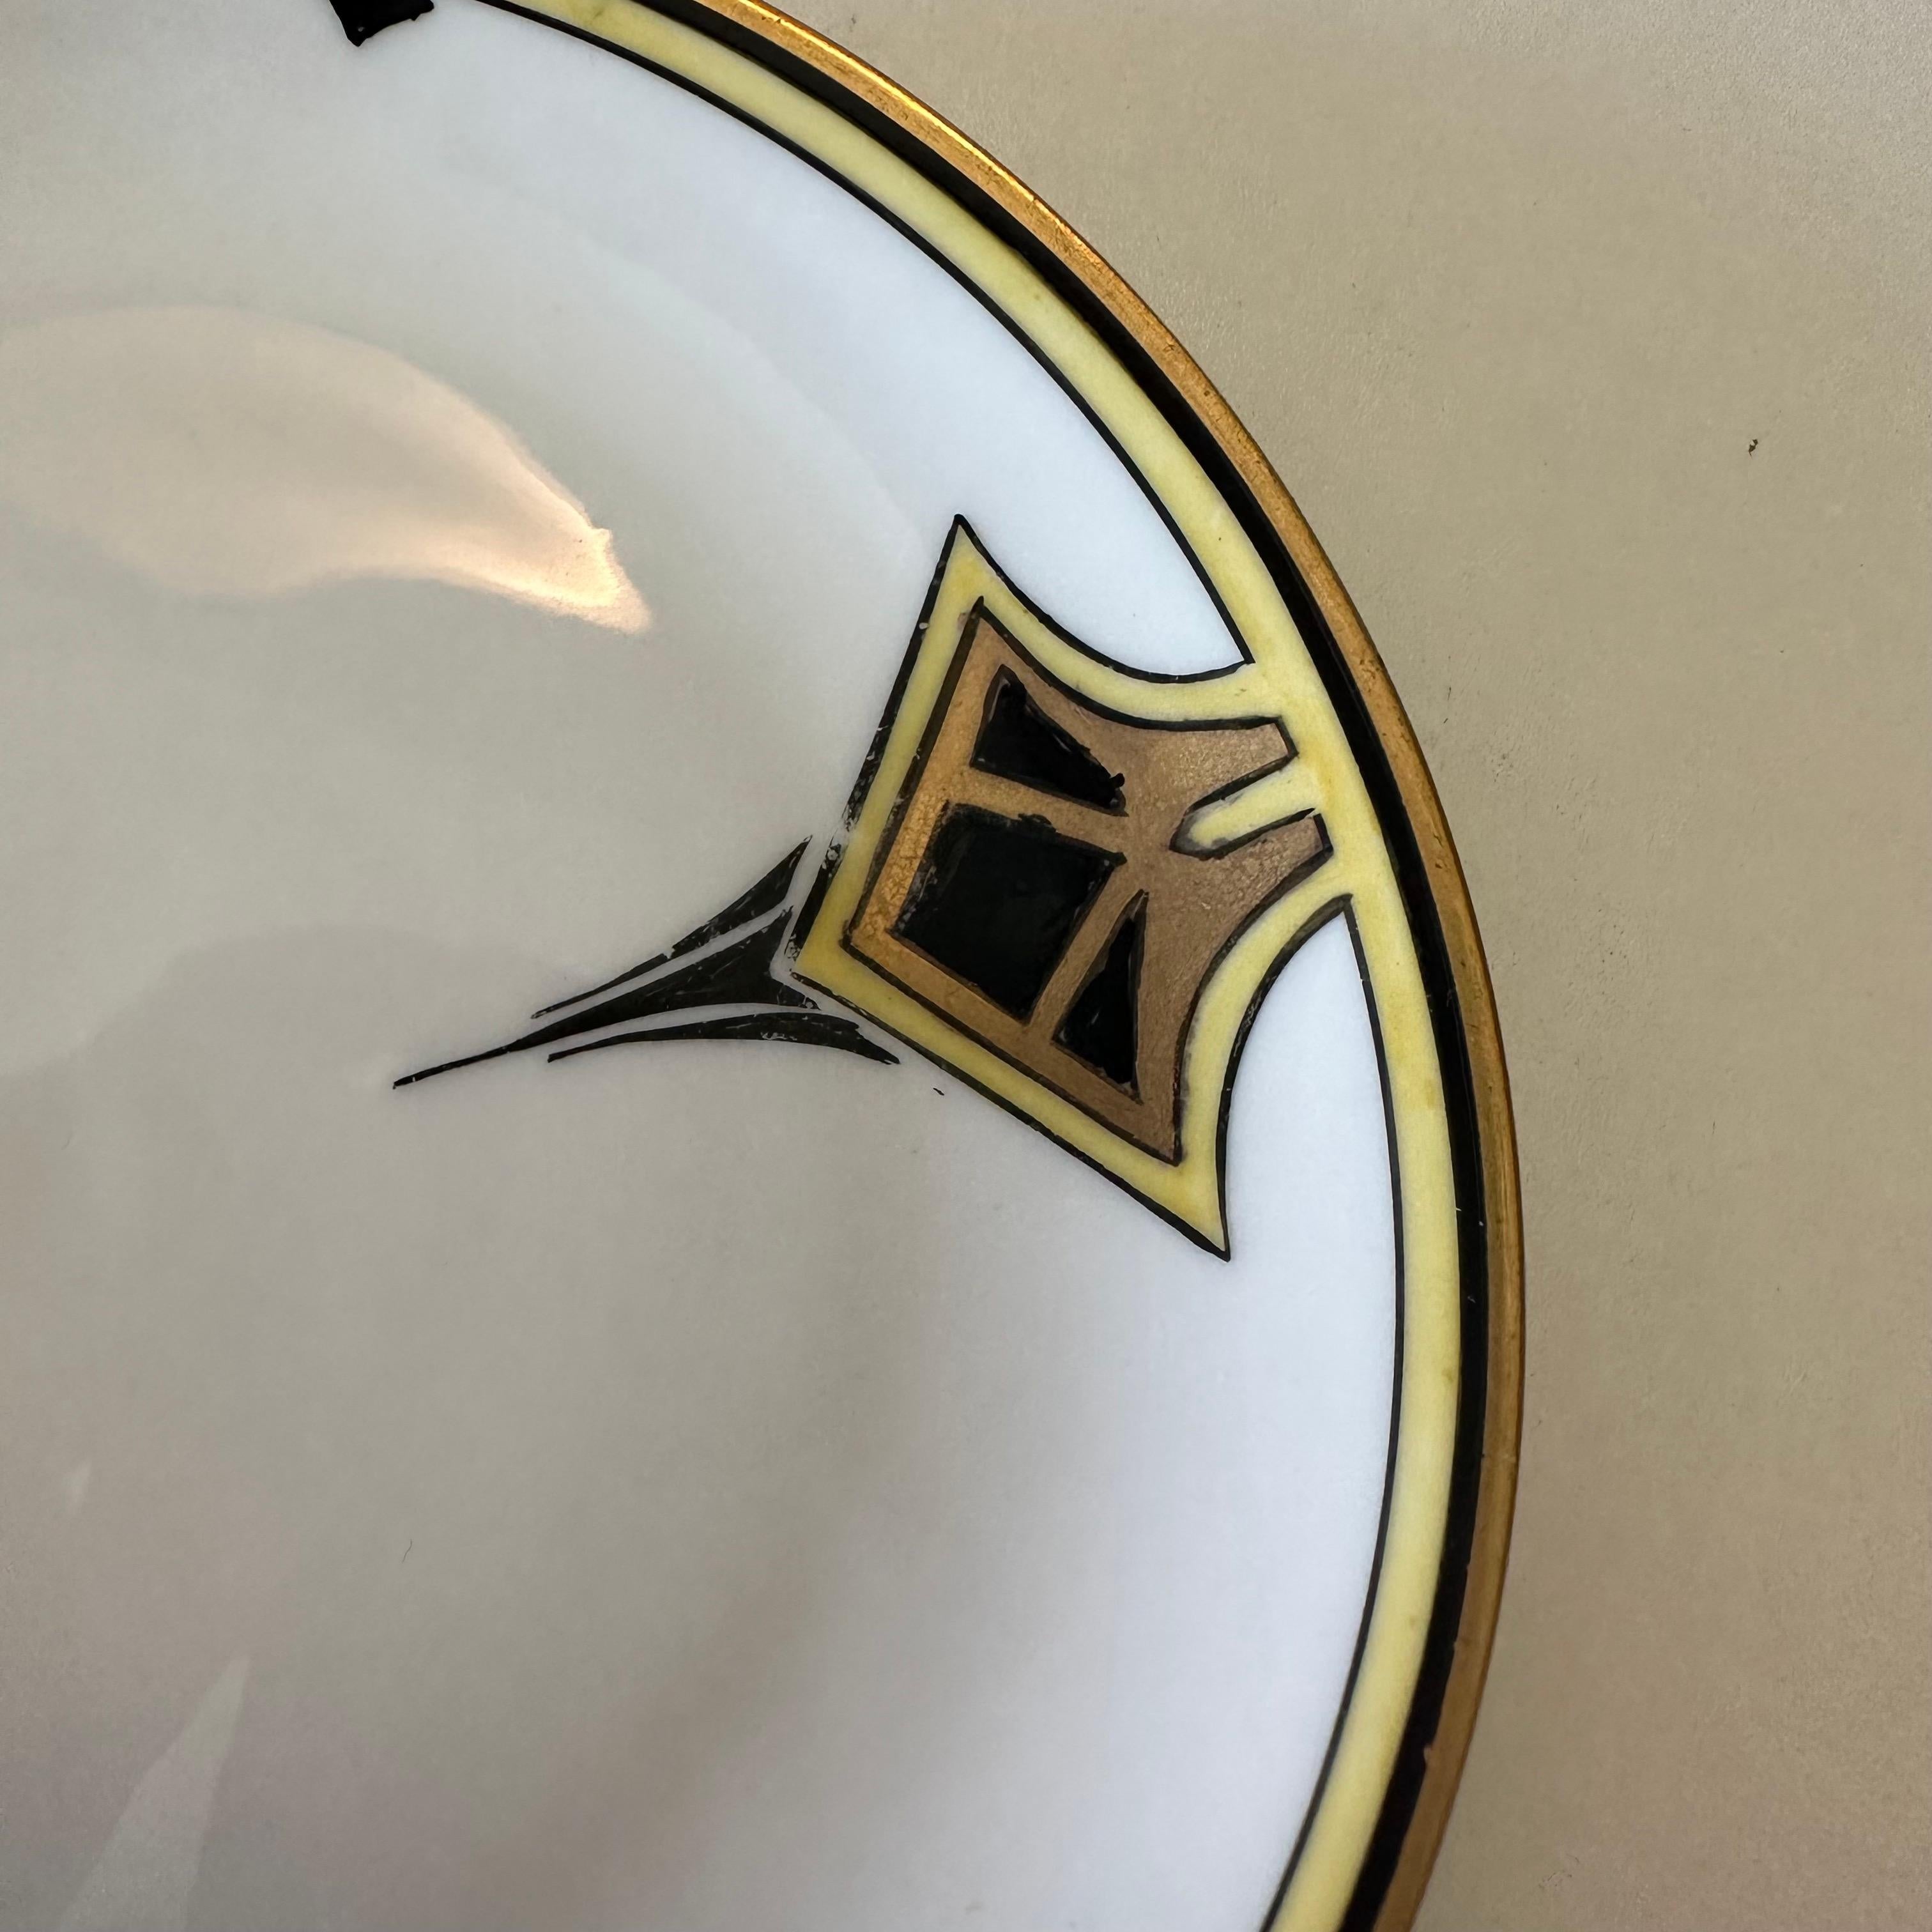 Assembled Set of Antique Hand Painted Art Deco Porcelain Plates In Good Condition For Sale In Amityville, NY